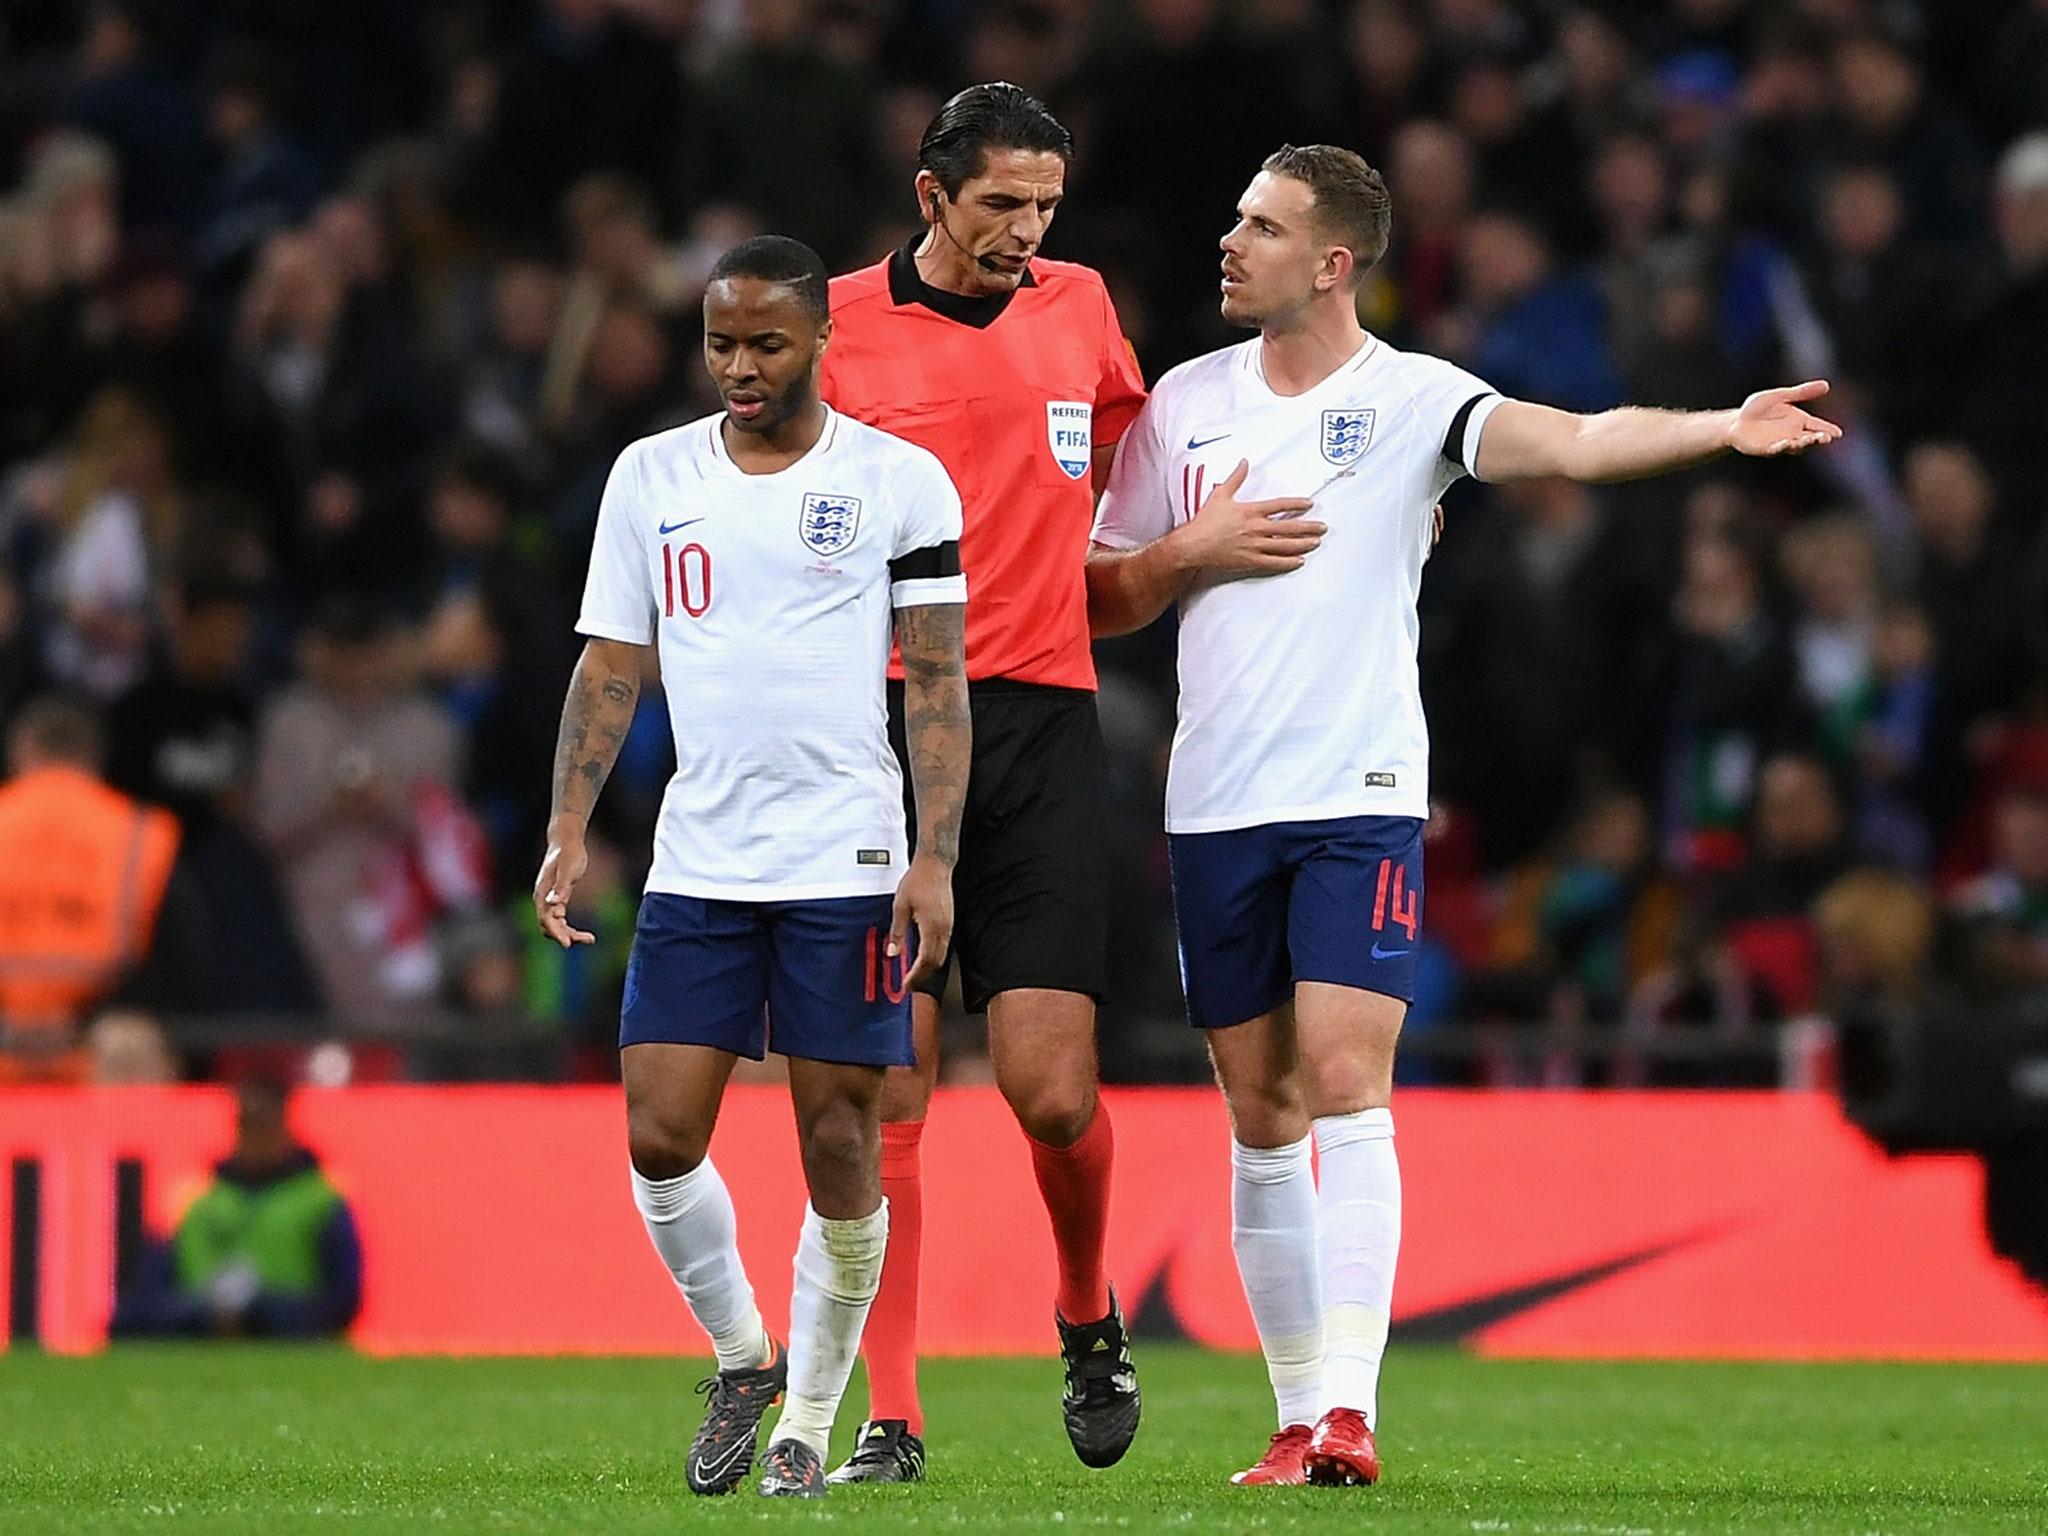 Jordan Henderson remonstrates with the referee after Italy's penalty